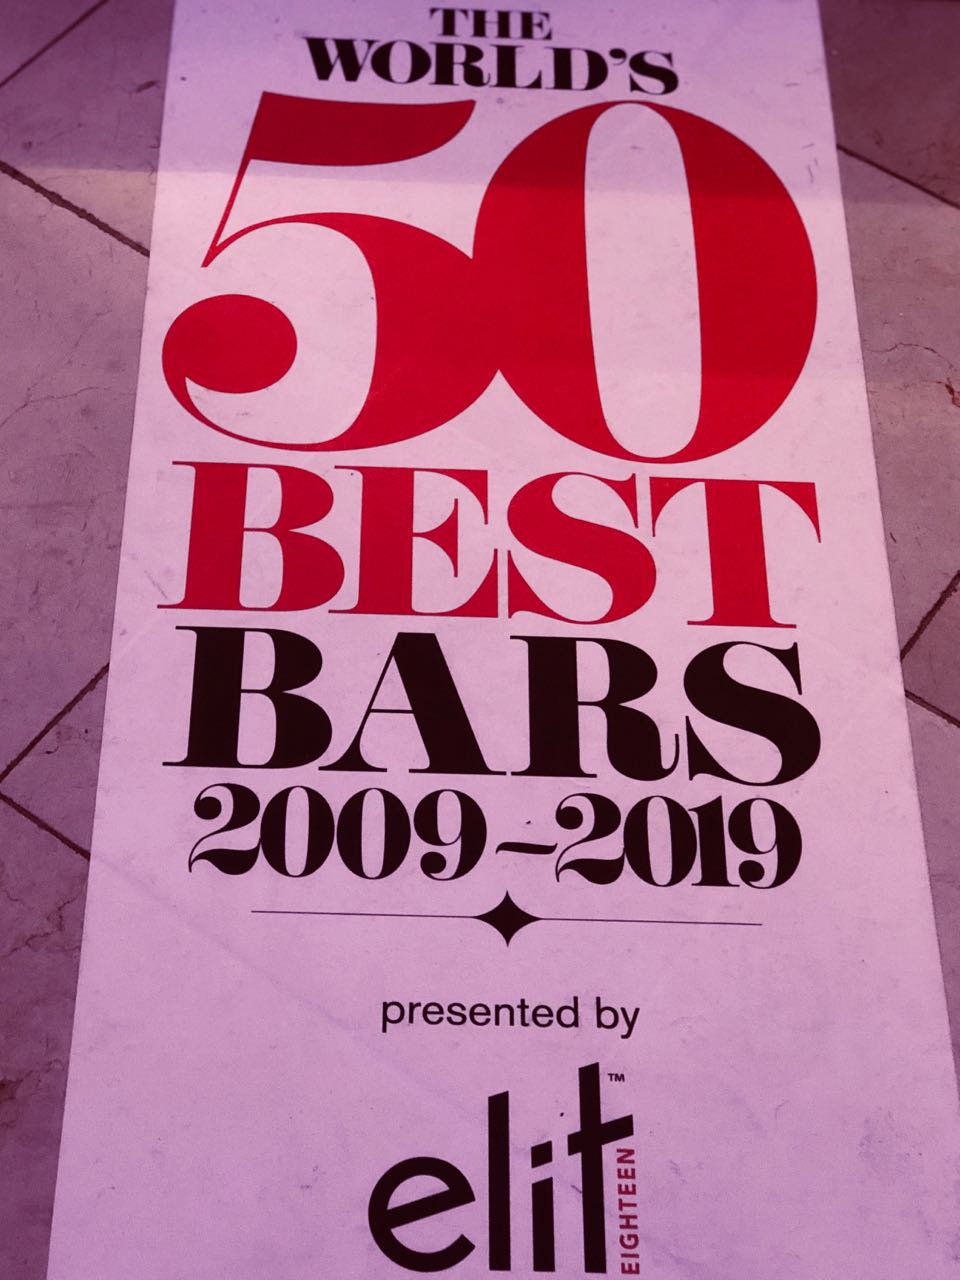 We Celebrate The World’s 50 Best Bars For Drinking Destinations